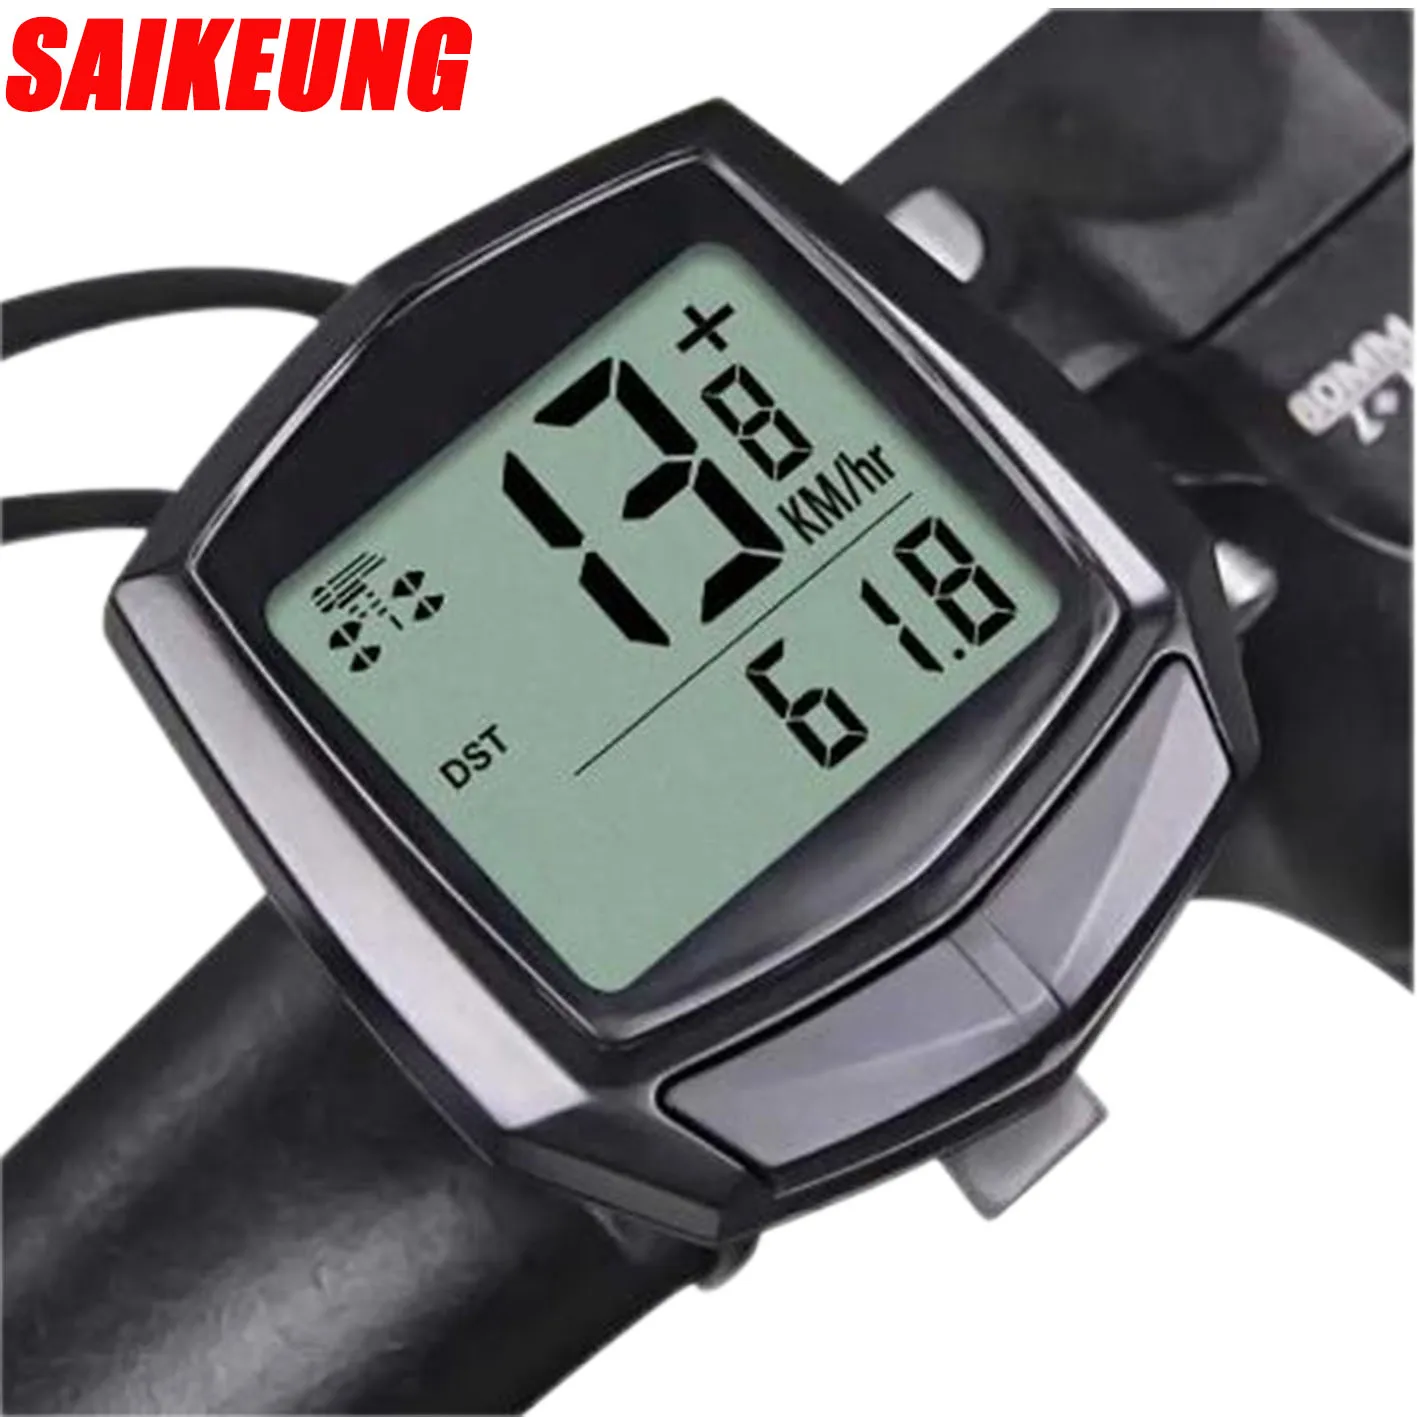 

SaiKeung Wired Digital Bike Ride Speedometer Odometer Bicycle Accessories Waterproof Bicycle Cycling Speed Counter Code Table